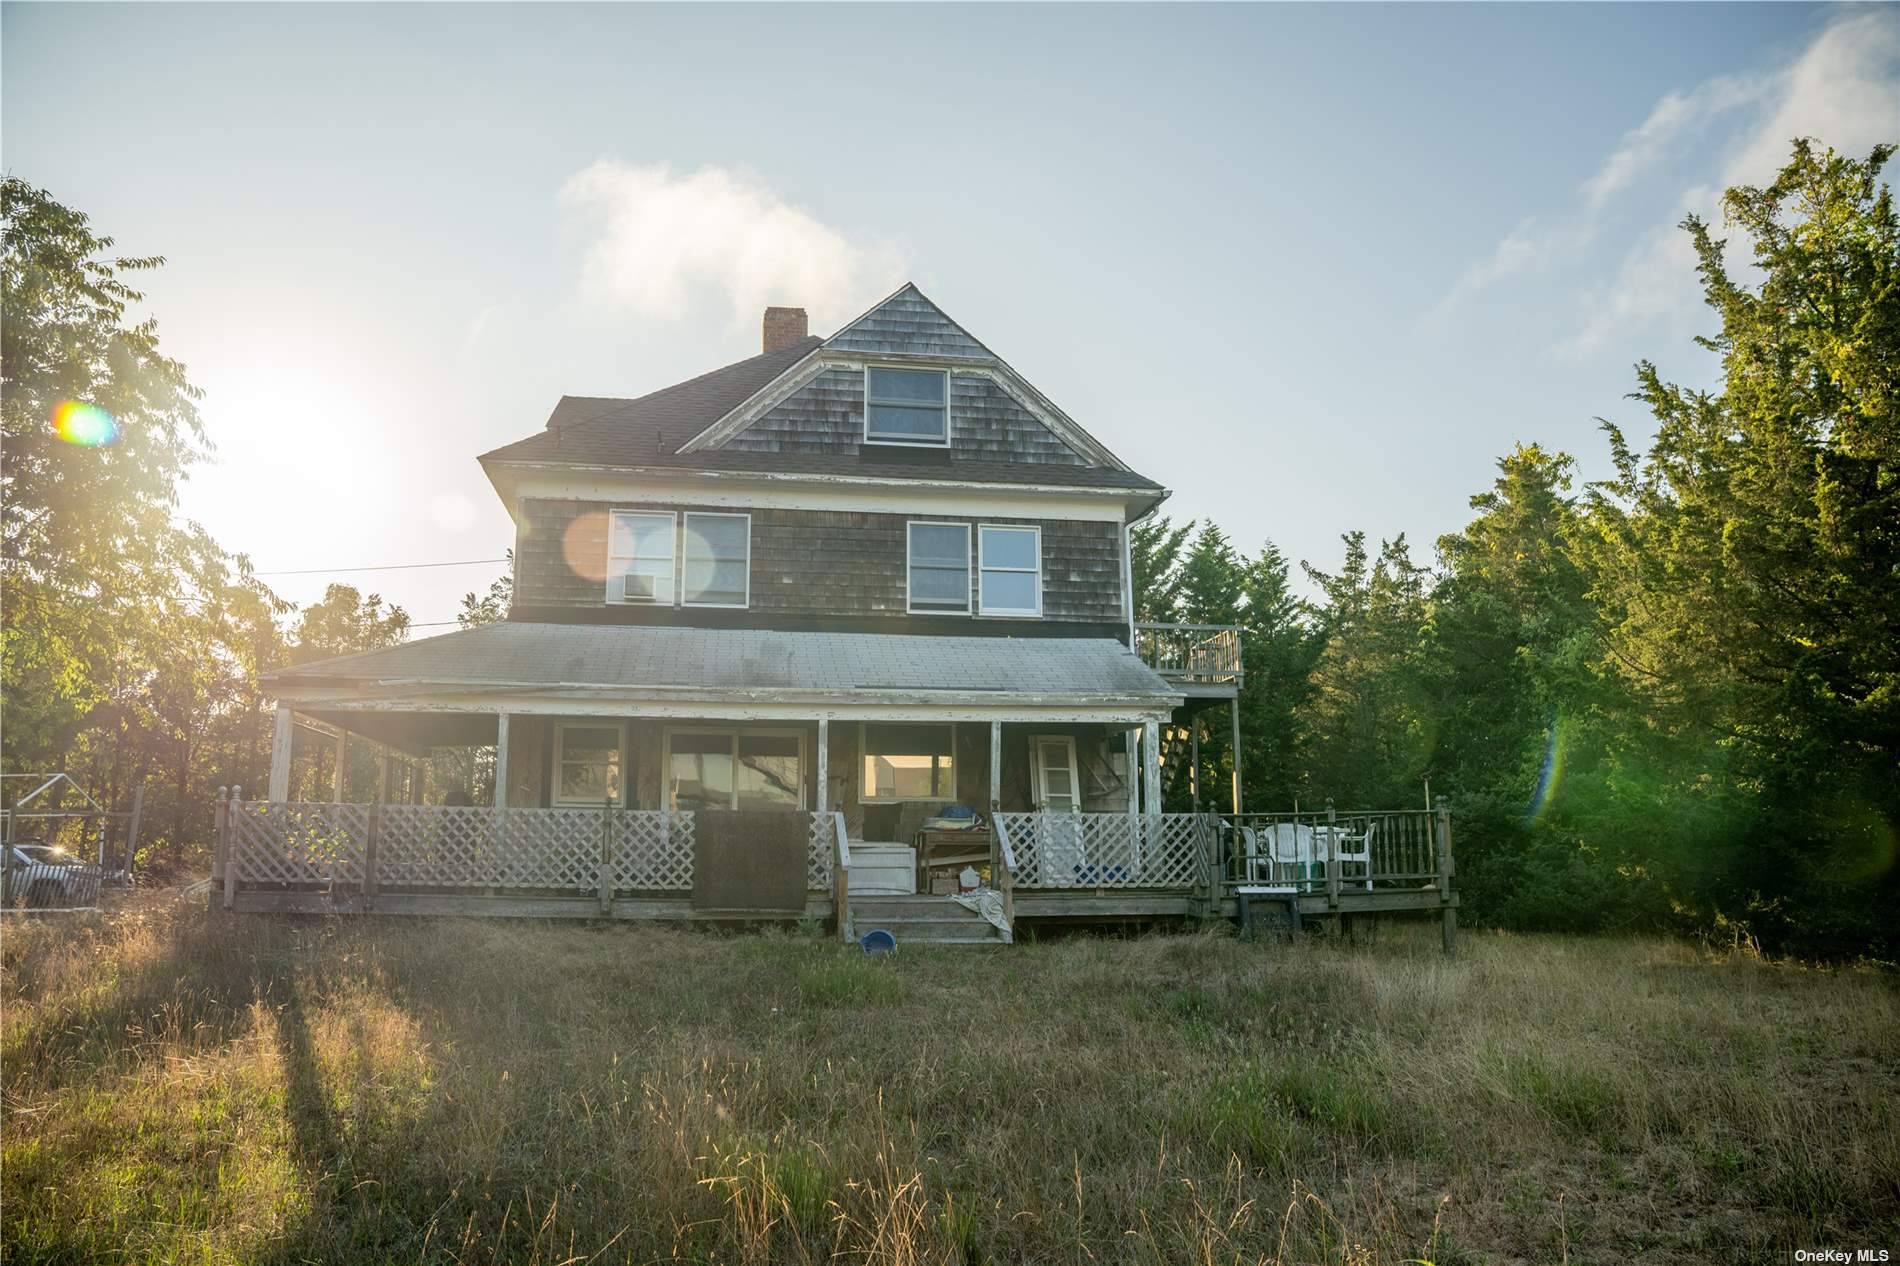 Have you been dreaming of living in the Hamptons ?